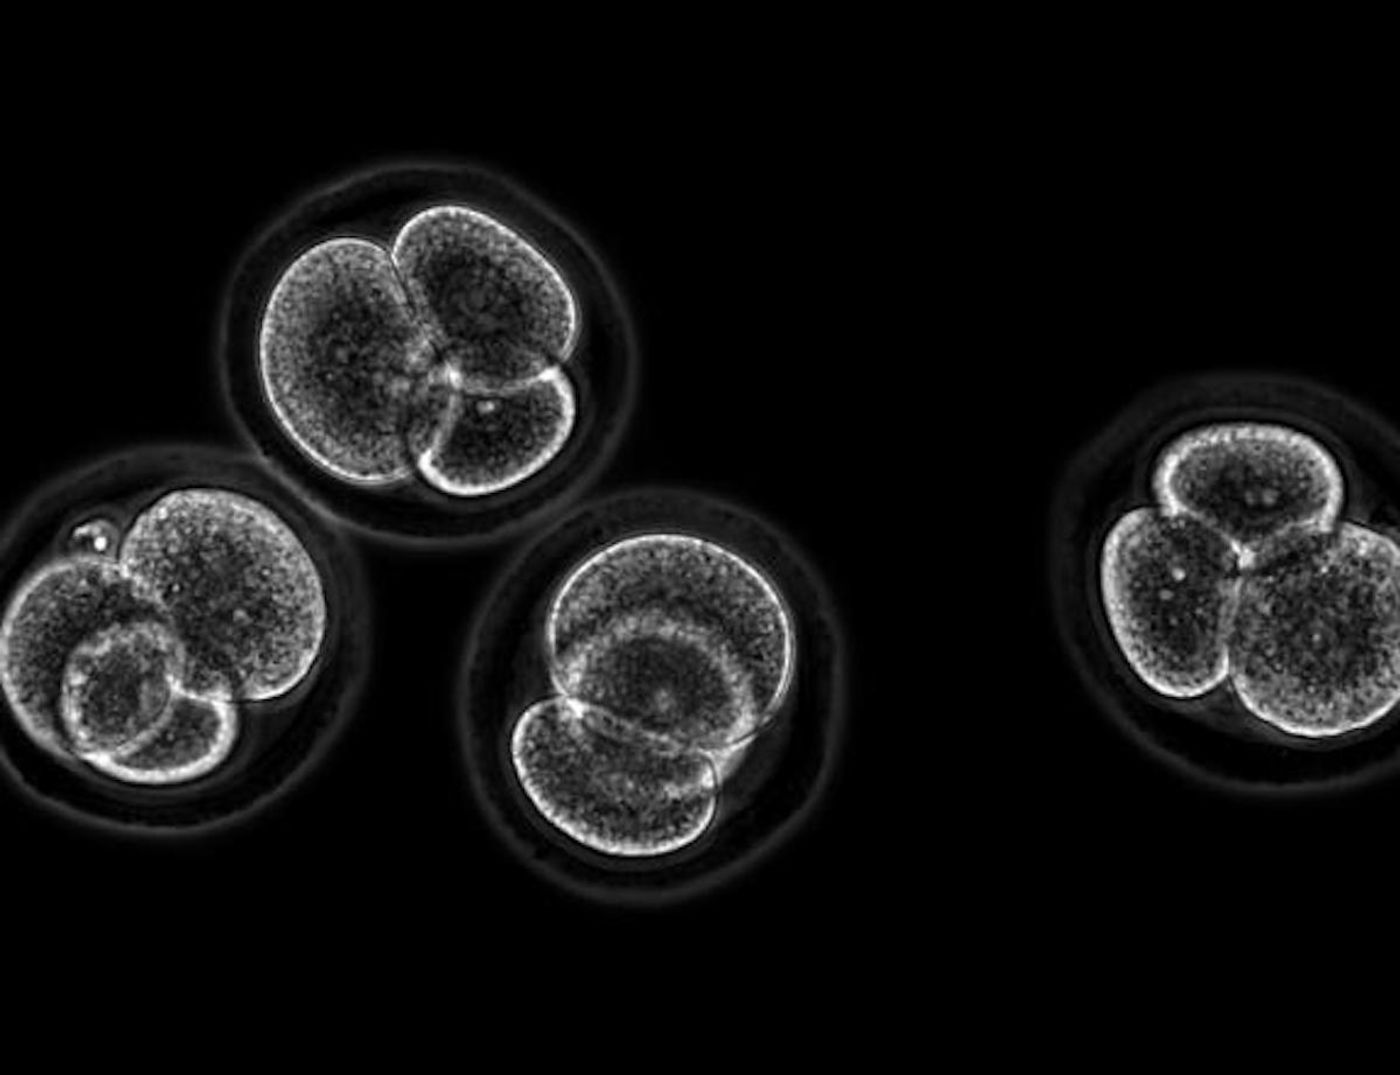 These are 4-cell stage mouse embryos. / Credit: Kirill Makedonski